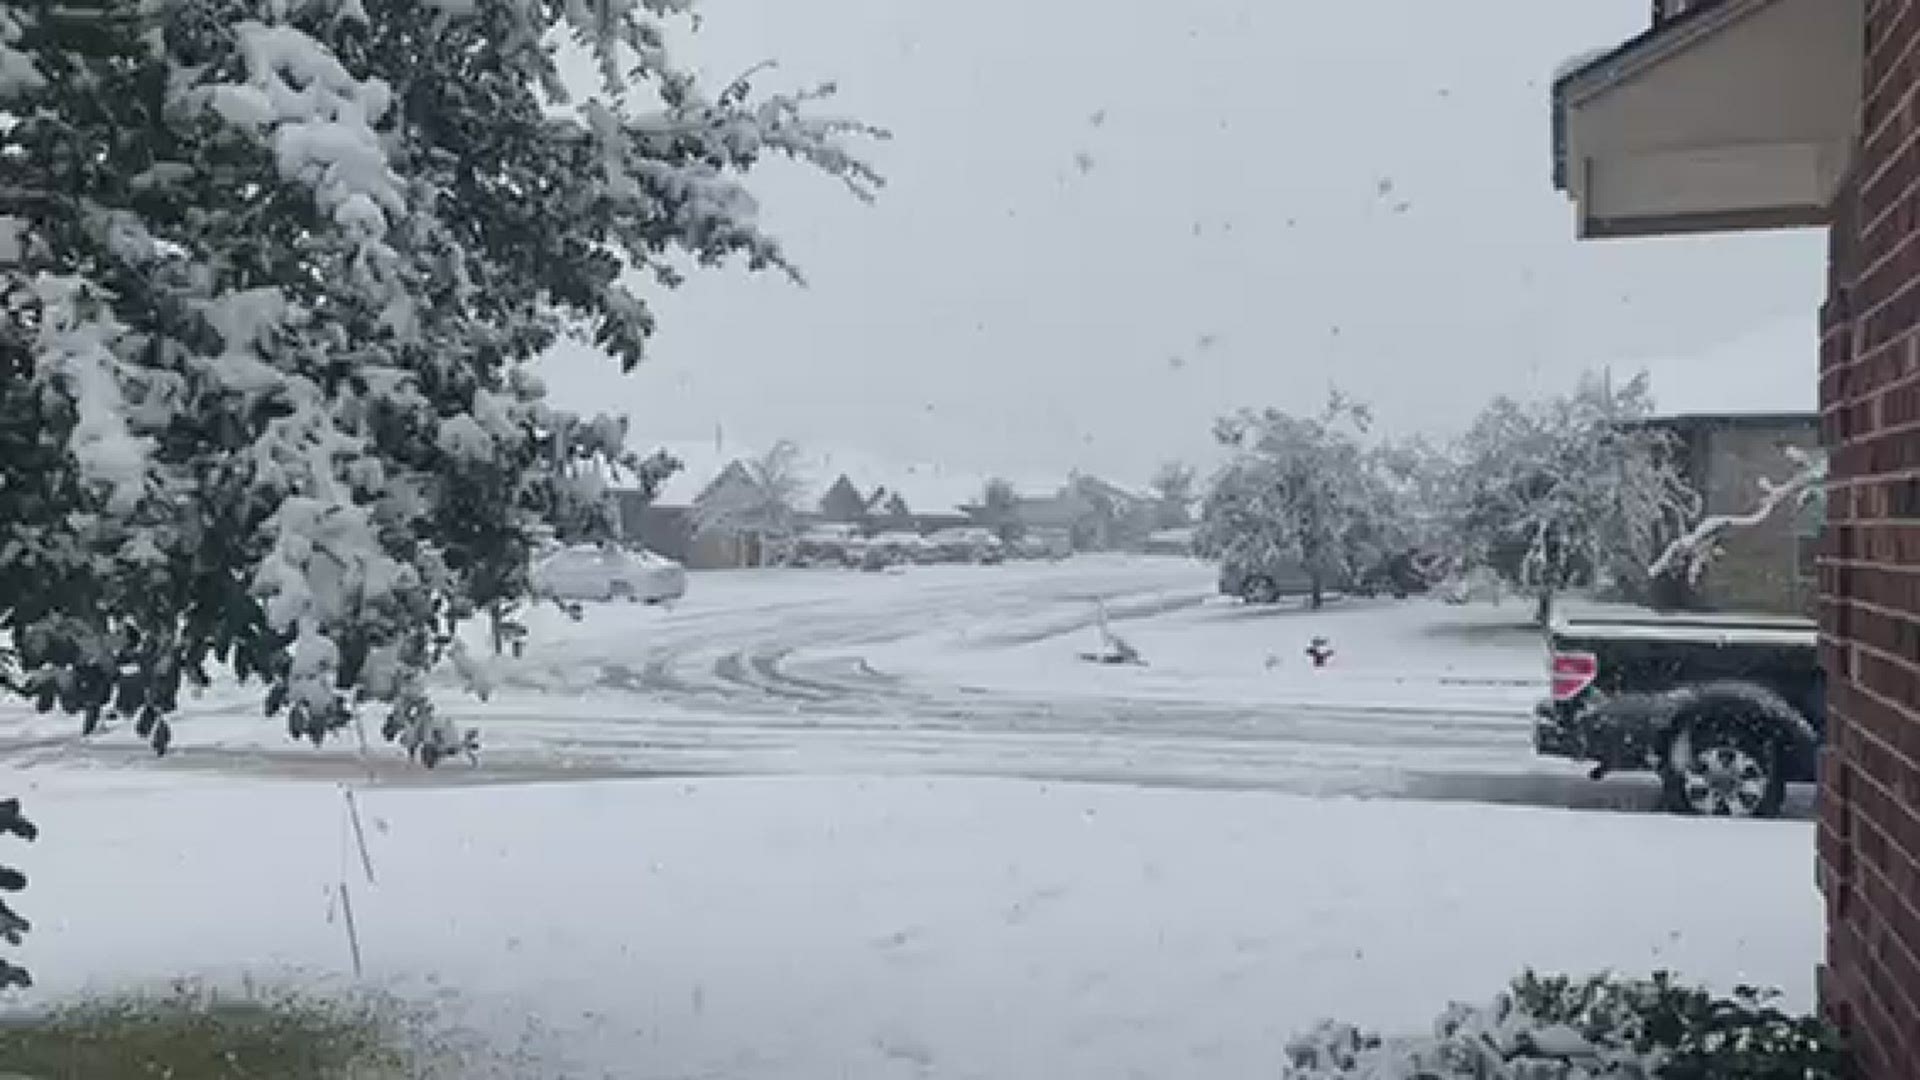 KHOU 11 viewer Samantha Pyle sent us this great photo of snow in College Station.